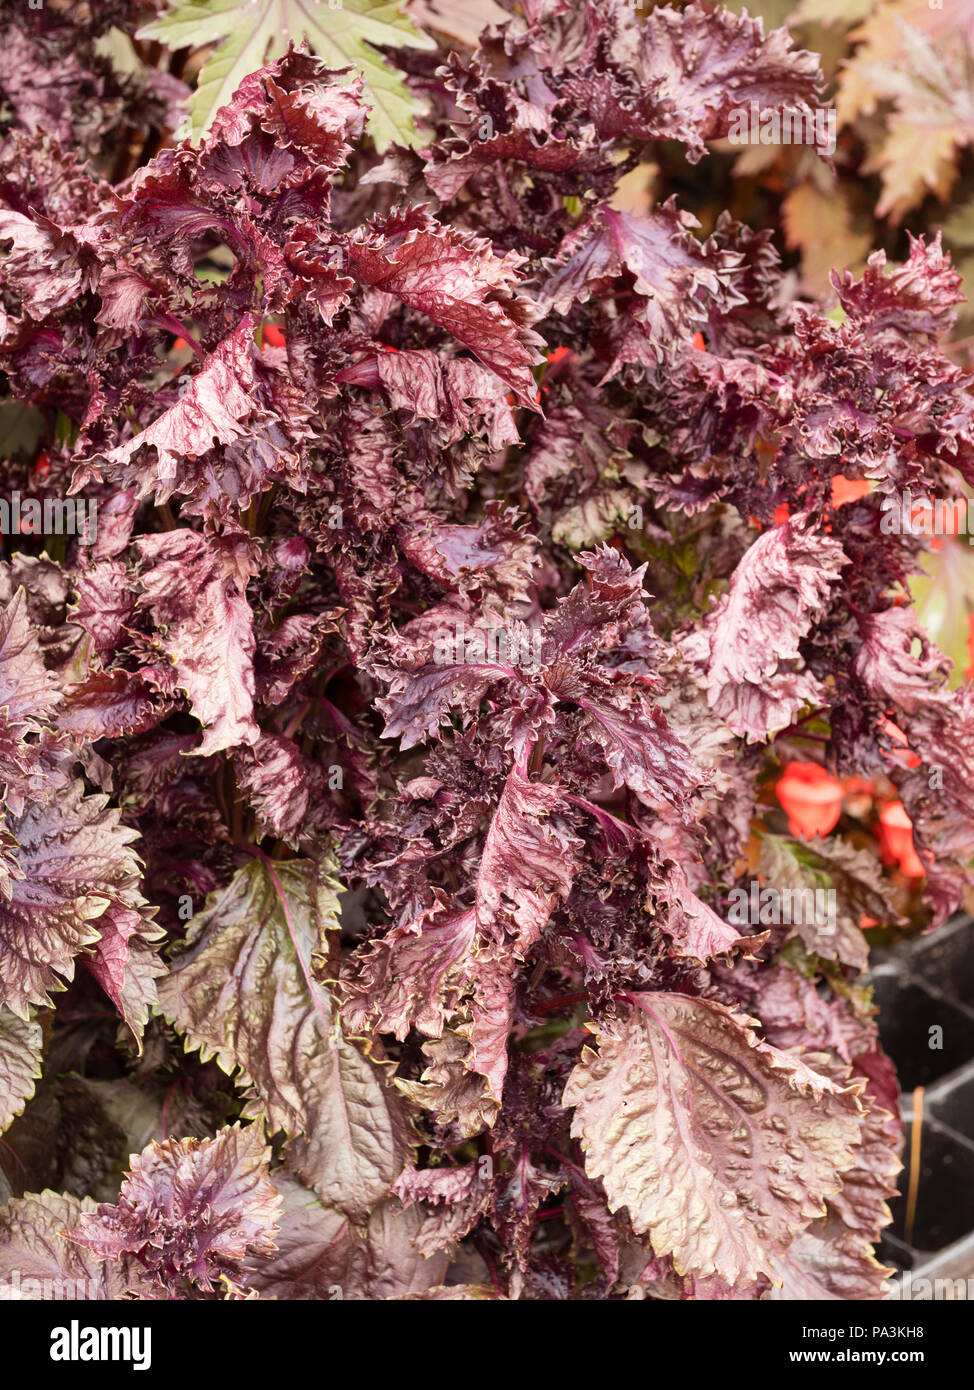 Crinkled, dark foliage of red Shiso, Perilla frutescens var. crispa, a ginger flavoured annual culinary herb Stock Photo